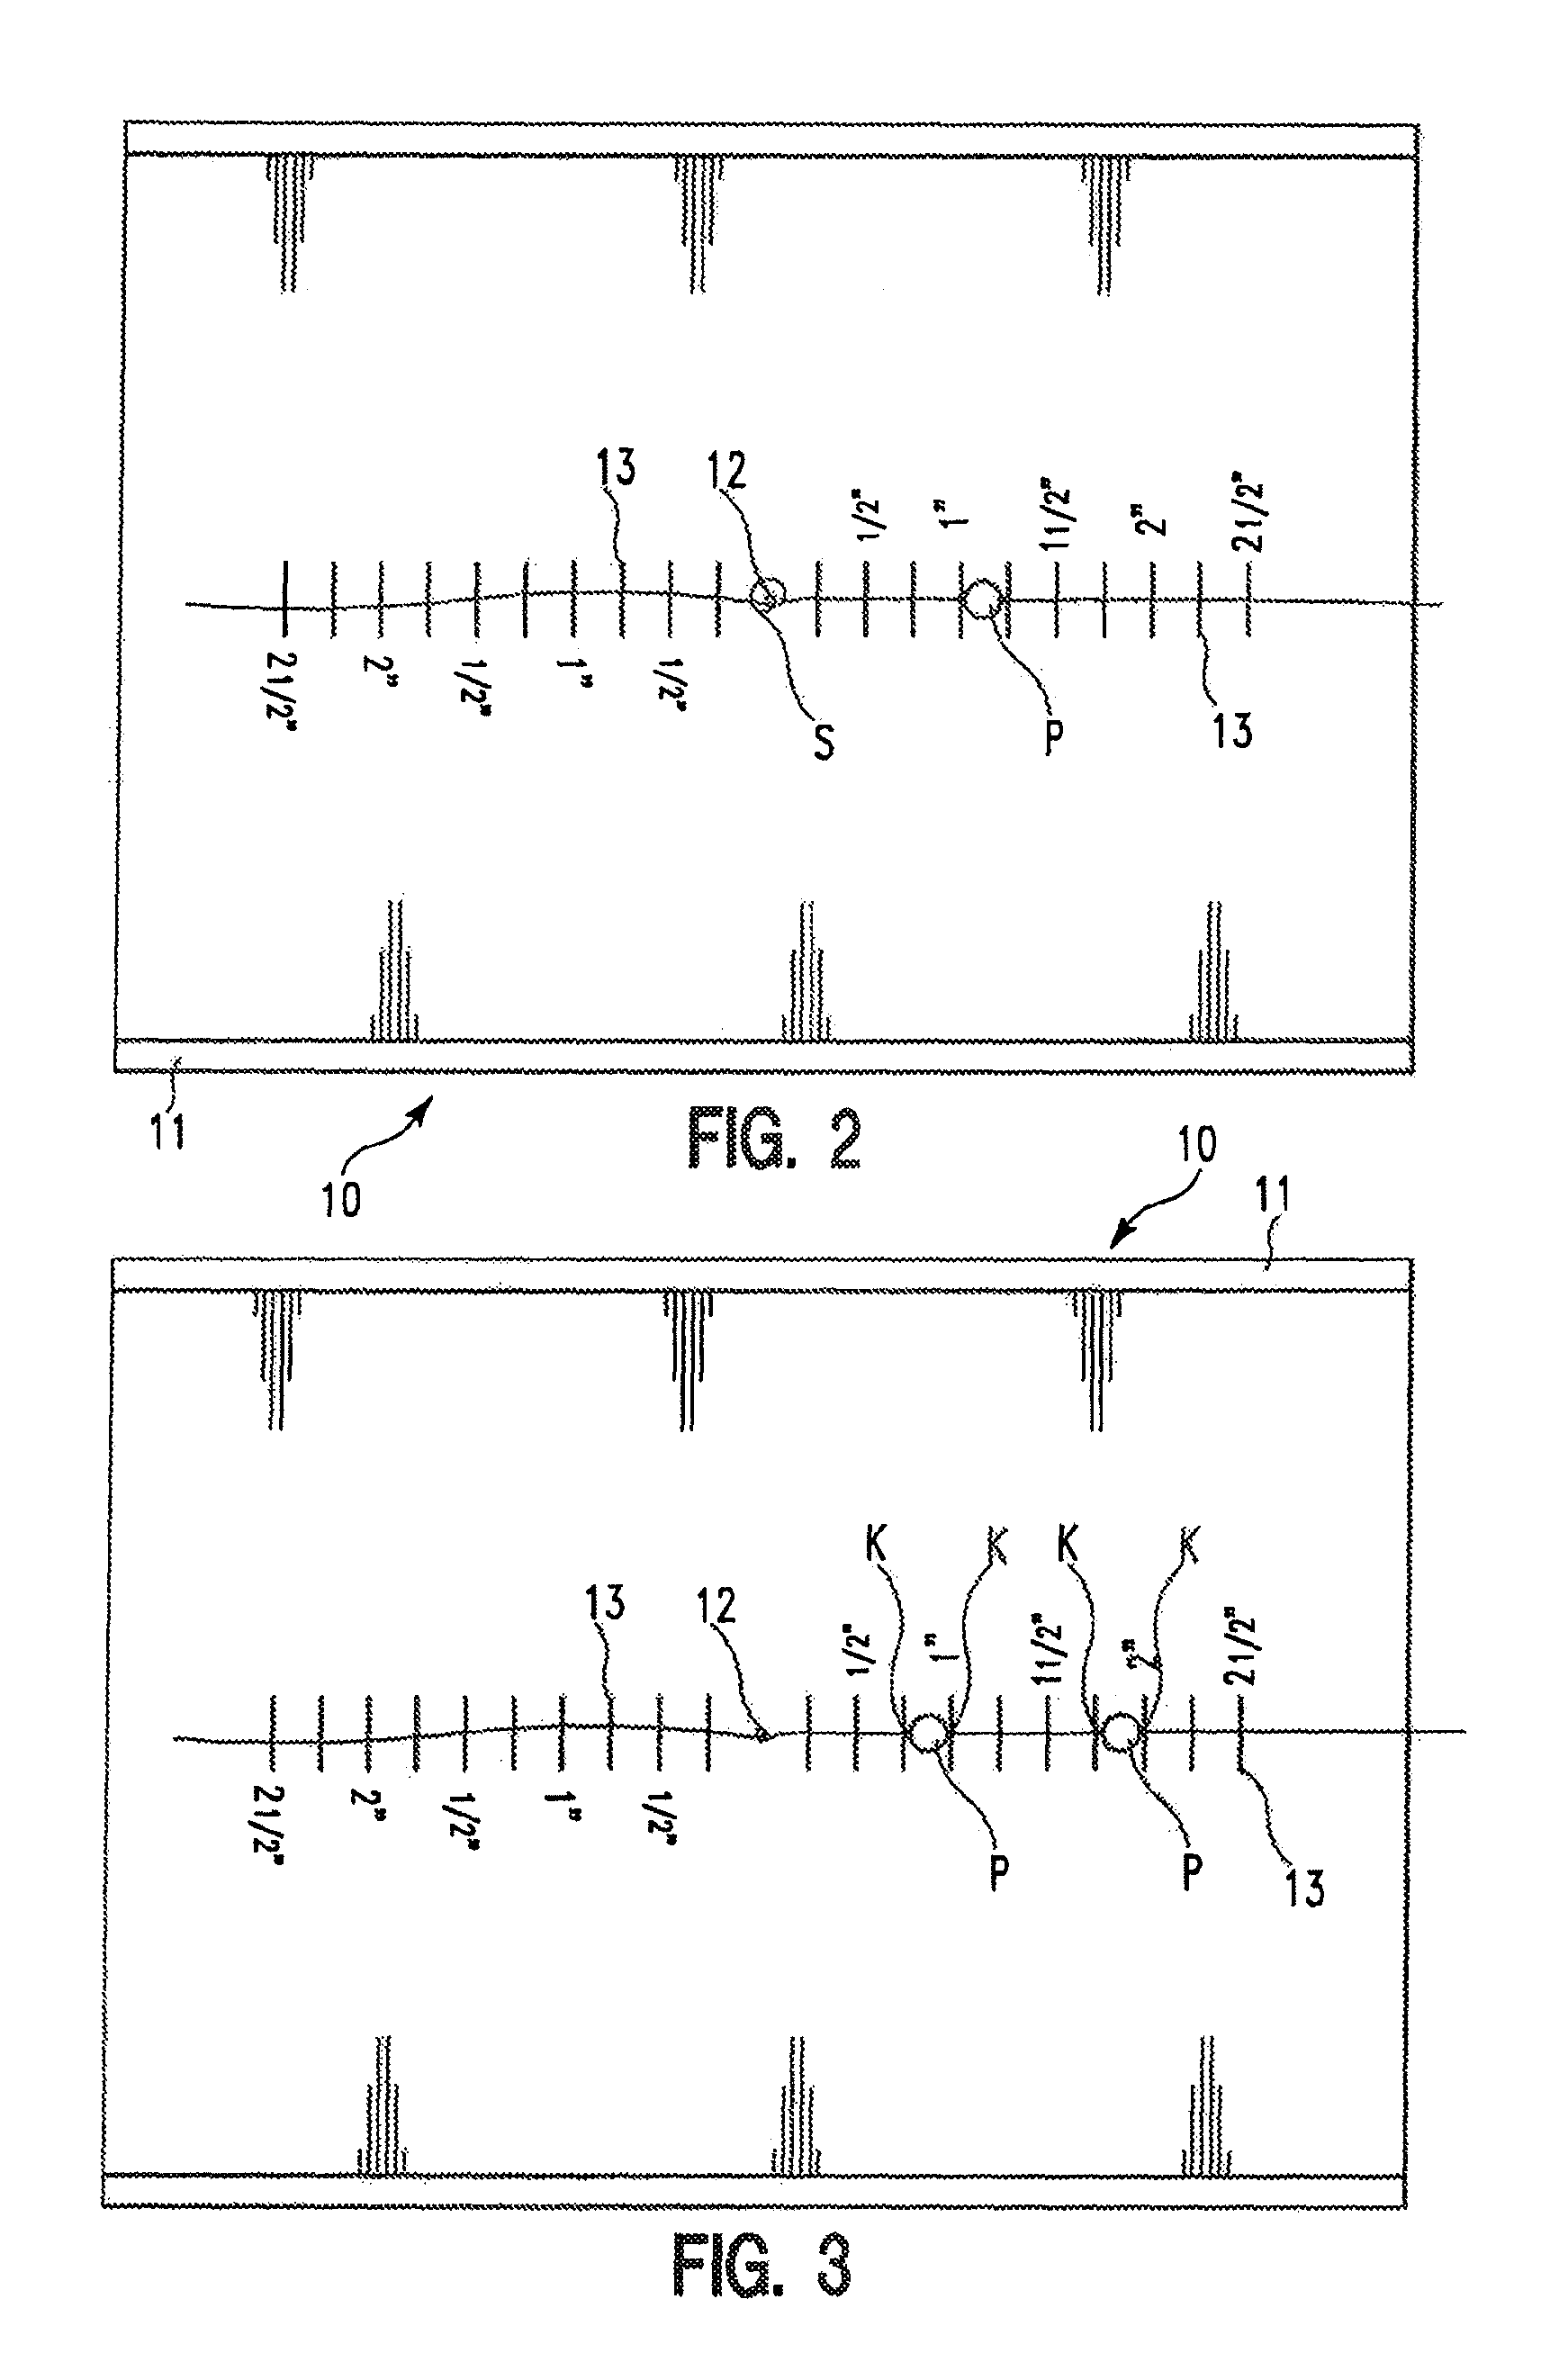 Knot tying device and method